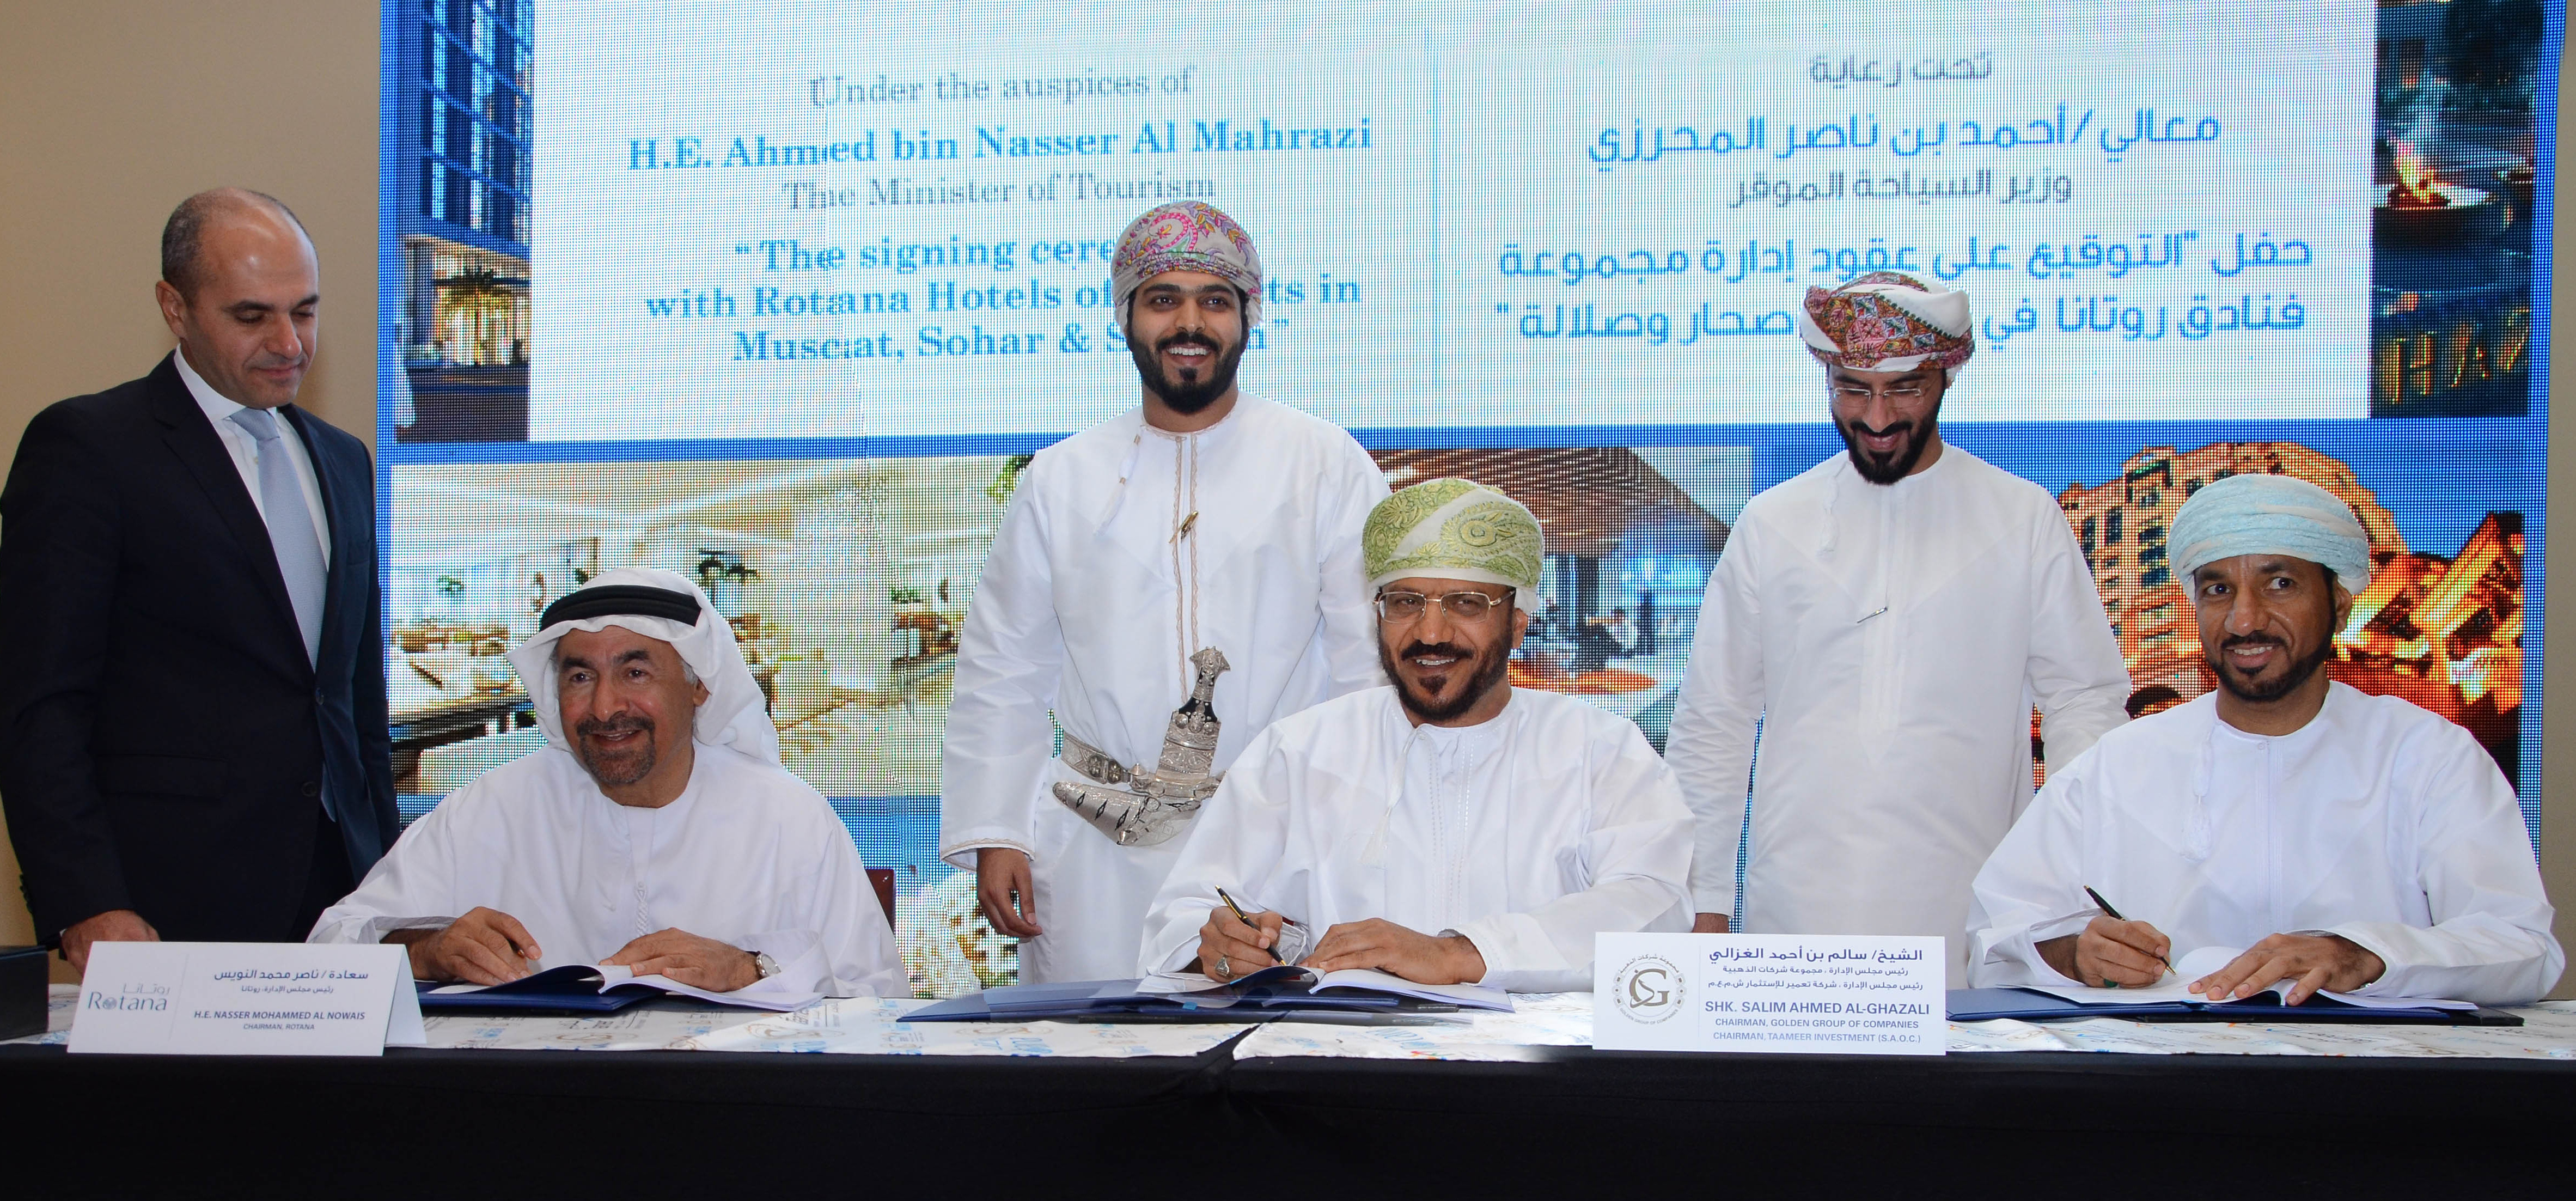 The signing ceremony was held on November 9 in Jibreen hall at Muscat Intercontinental Hotel under the patronage of HE Ahmed bin Nasser Al Mahrazi, Minister of Tourism